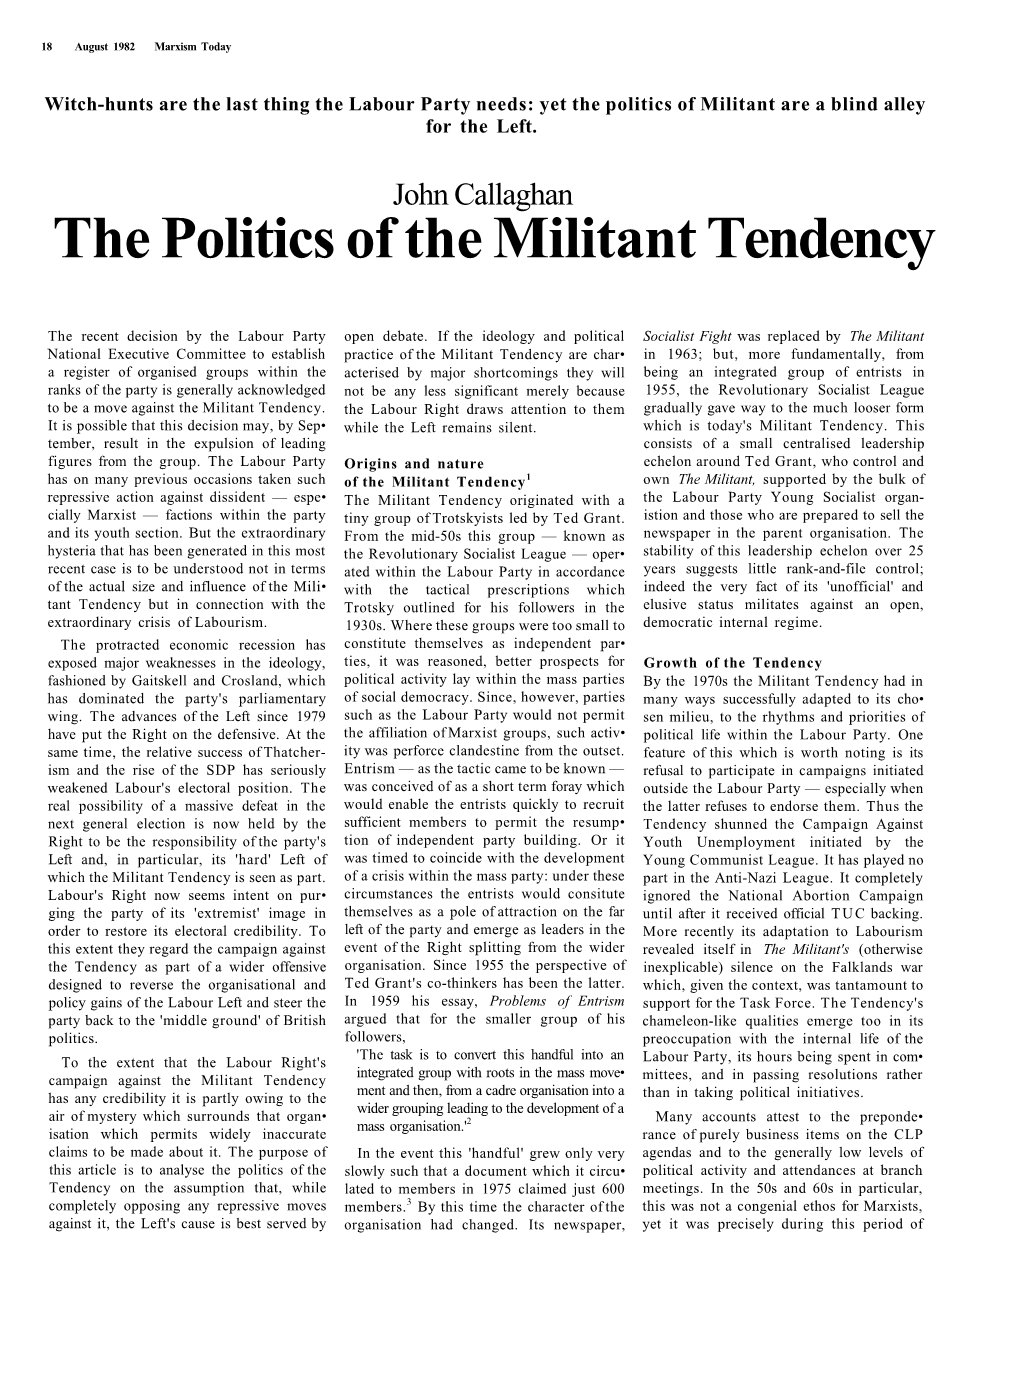 The Politics of the Militant Tendency